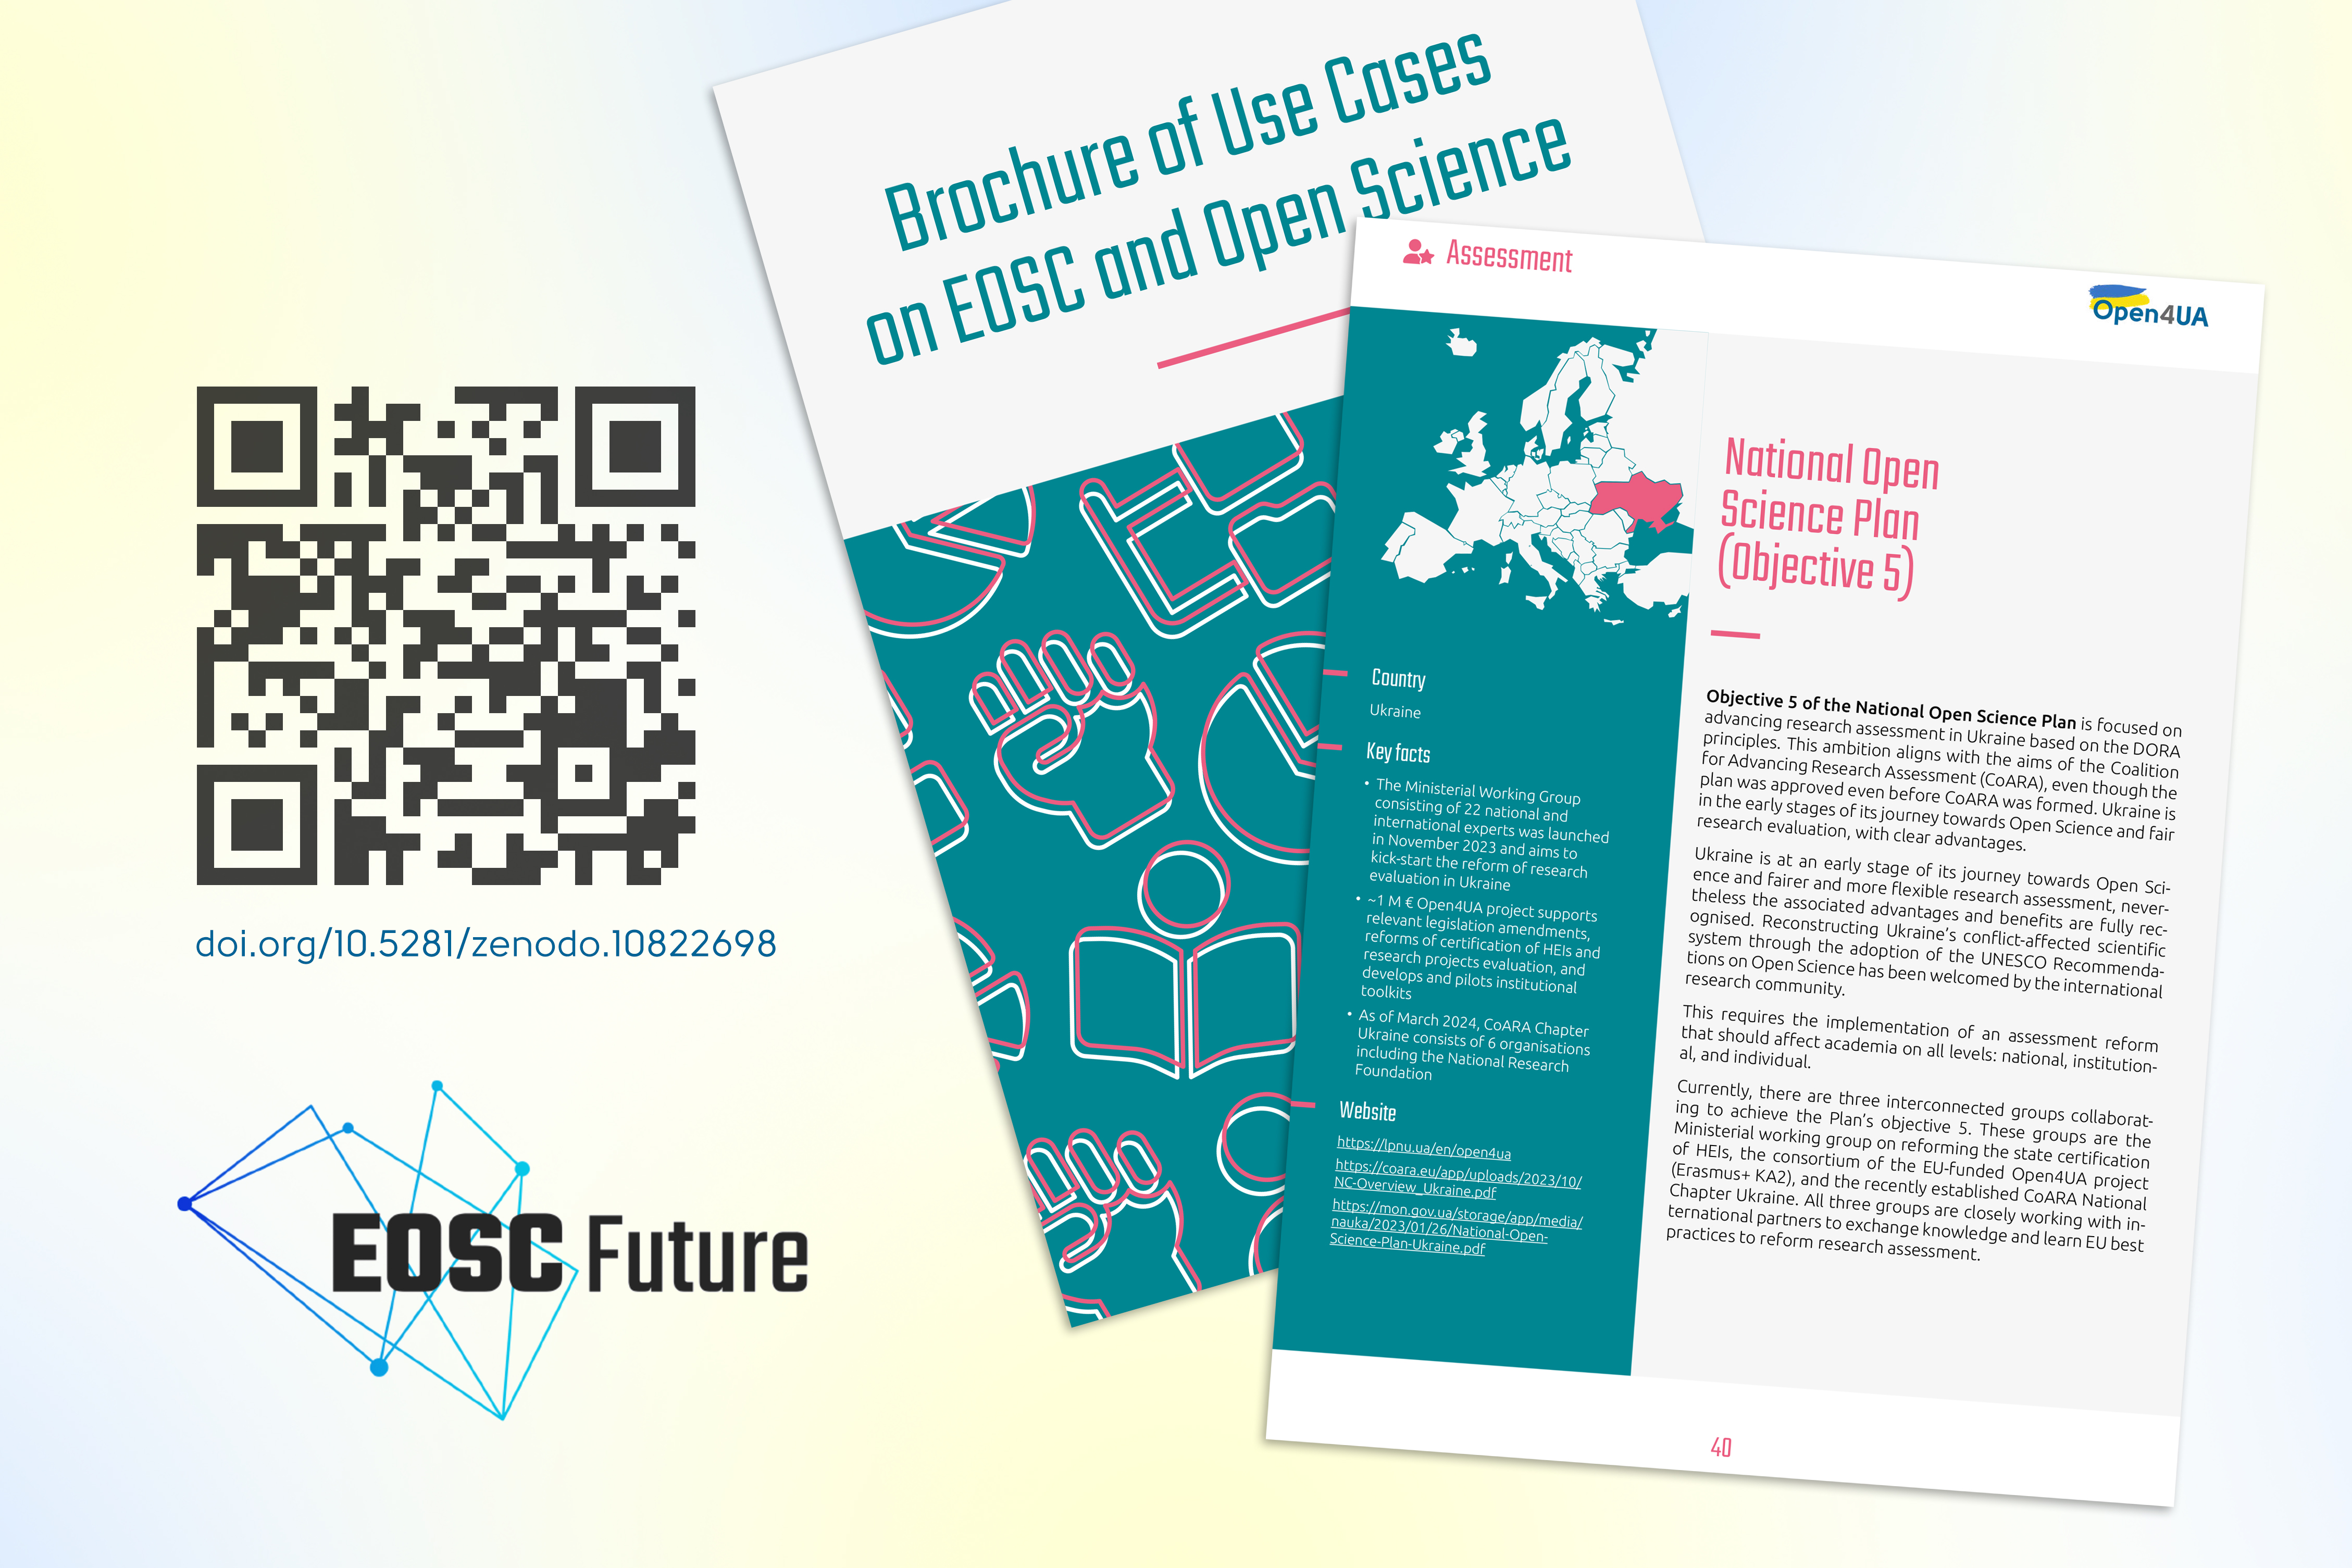 Open4UA project featured in the EOSC Future Brochure of Use Cases